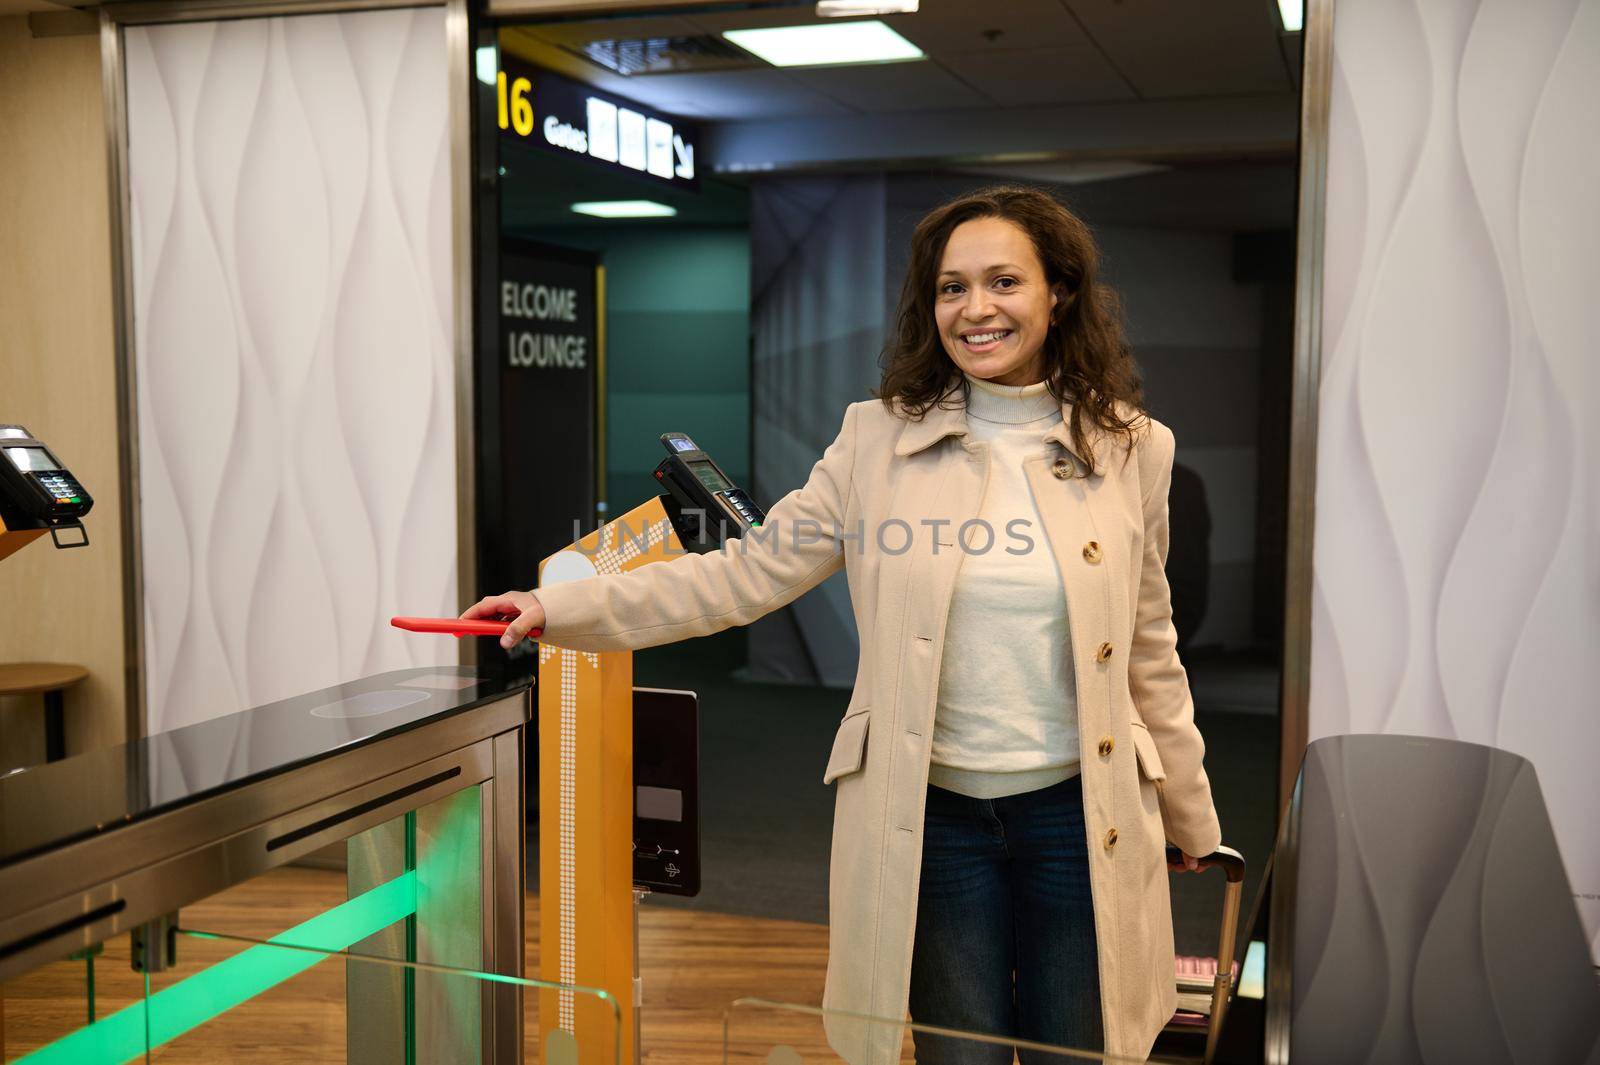 Beautiful woman passenger scanning information on the phone by placing it over the scanner to read the QR-codes at the check-in counter while entering the VIP lounge in the airport departure terminal by artgf